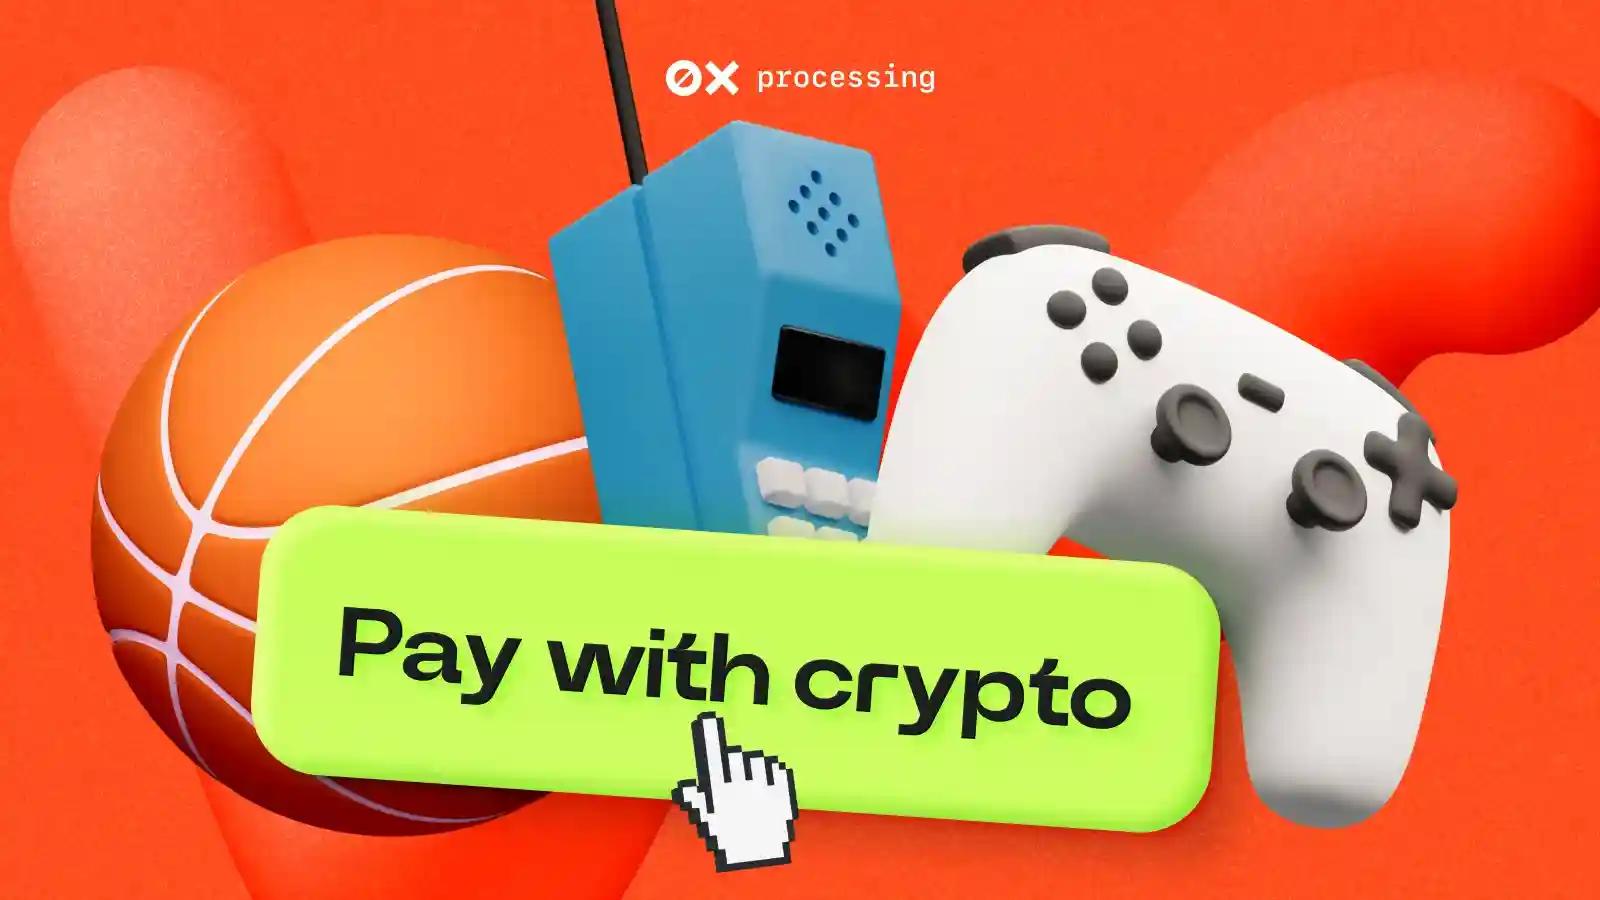 Cryptocurrency Payment Integration: How to Add Processing to Your Website